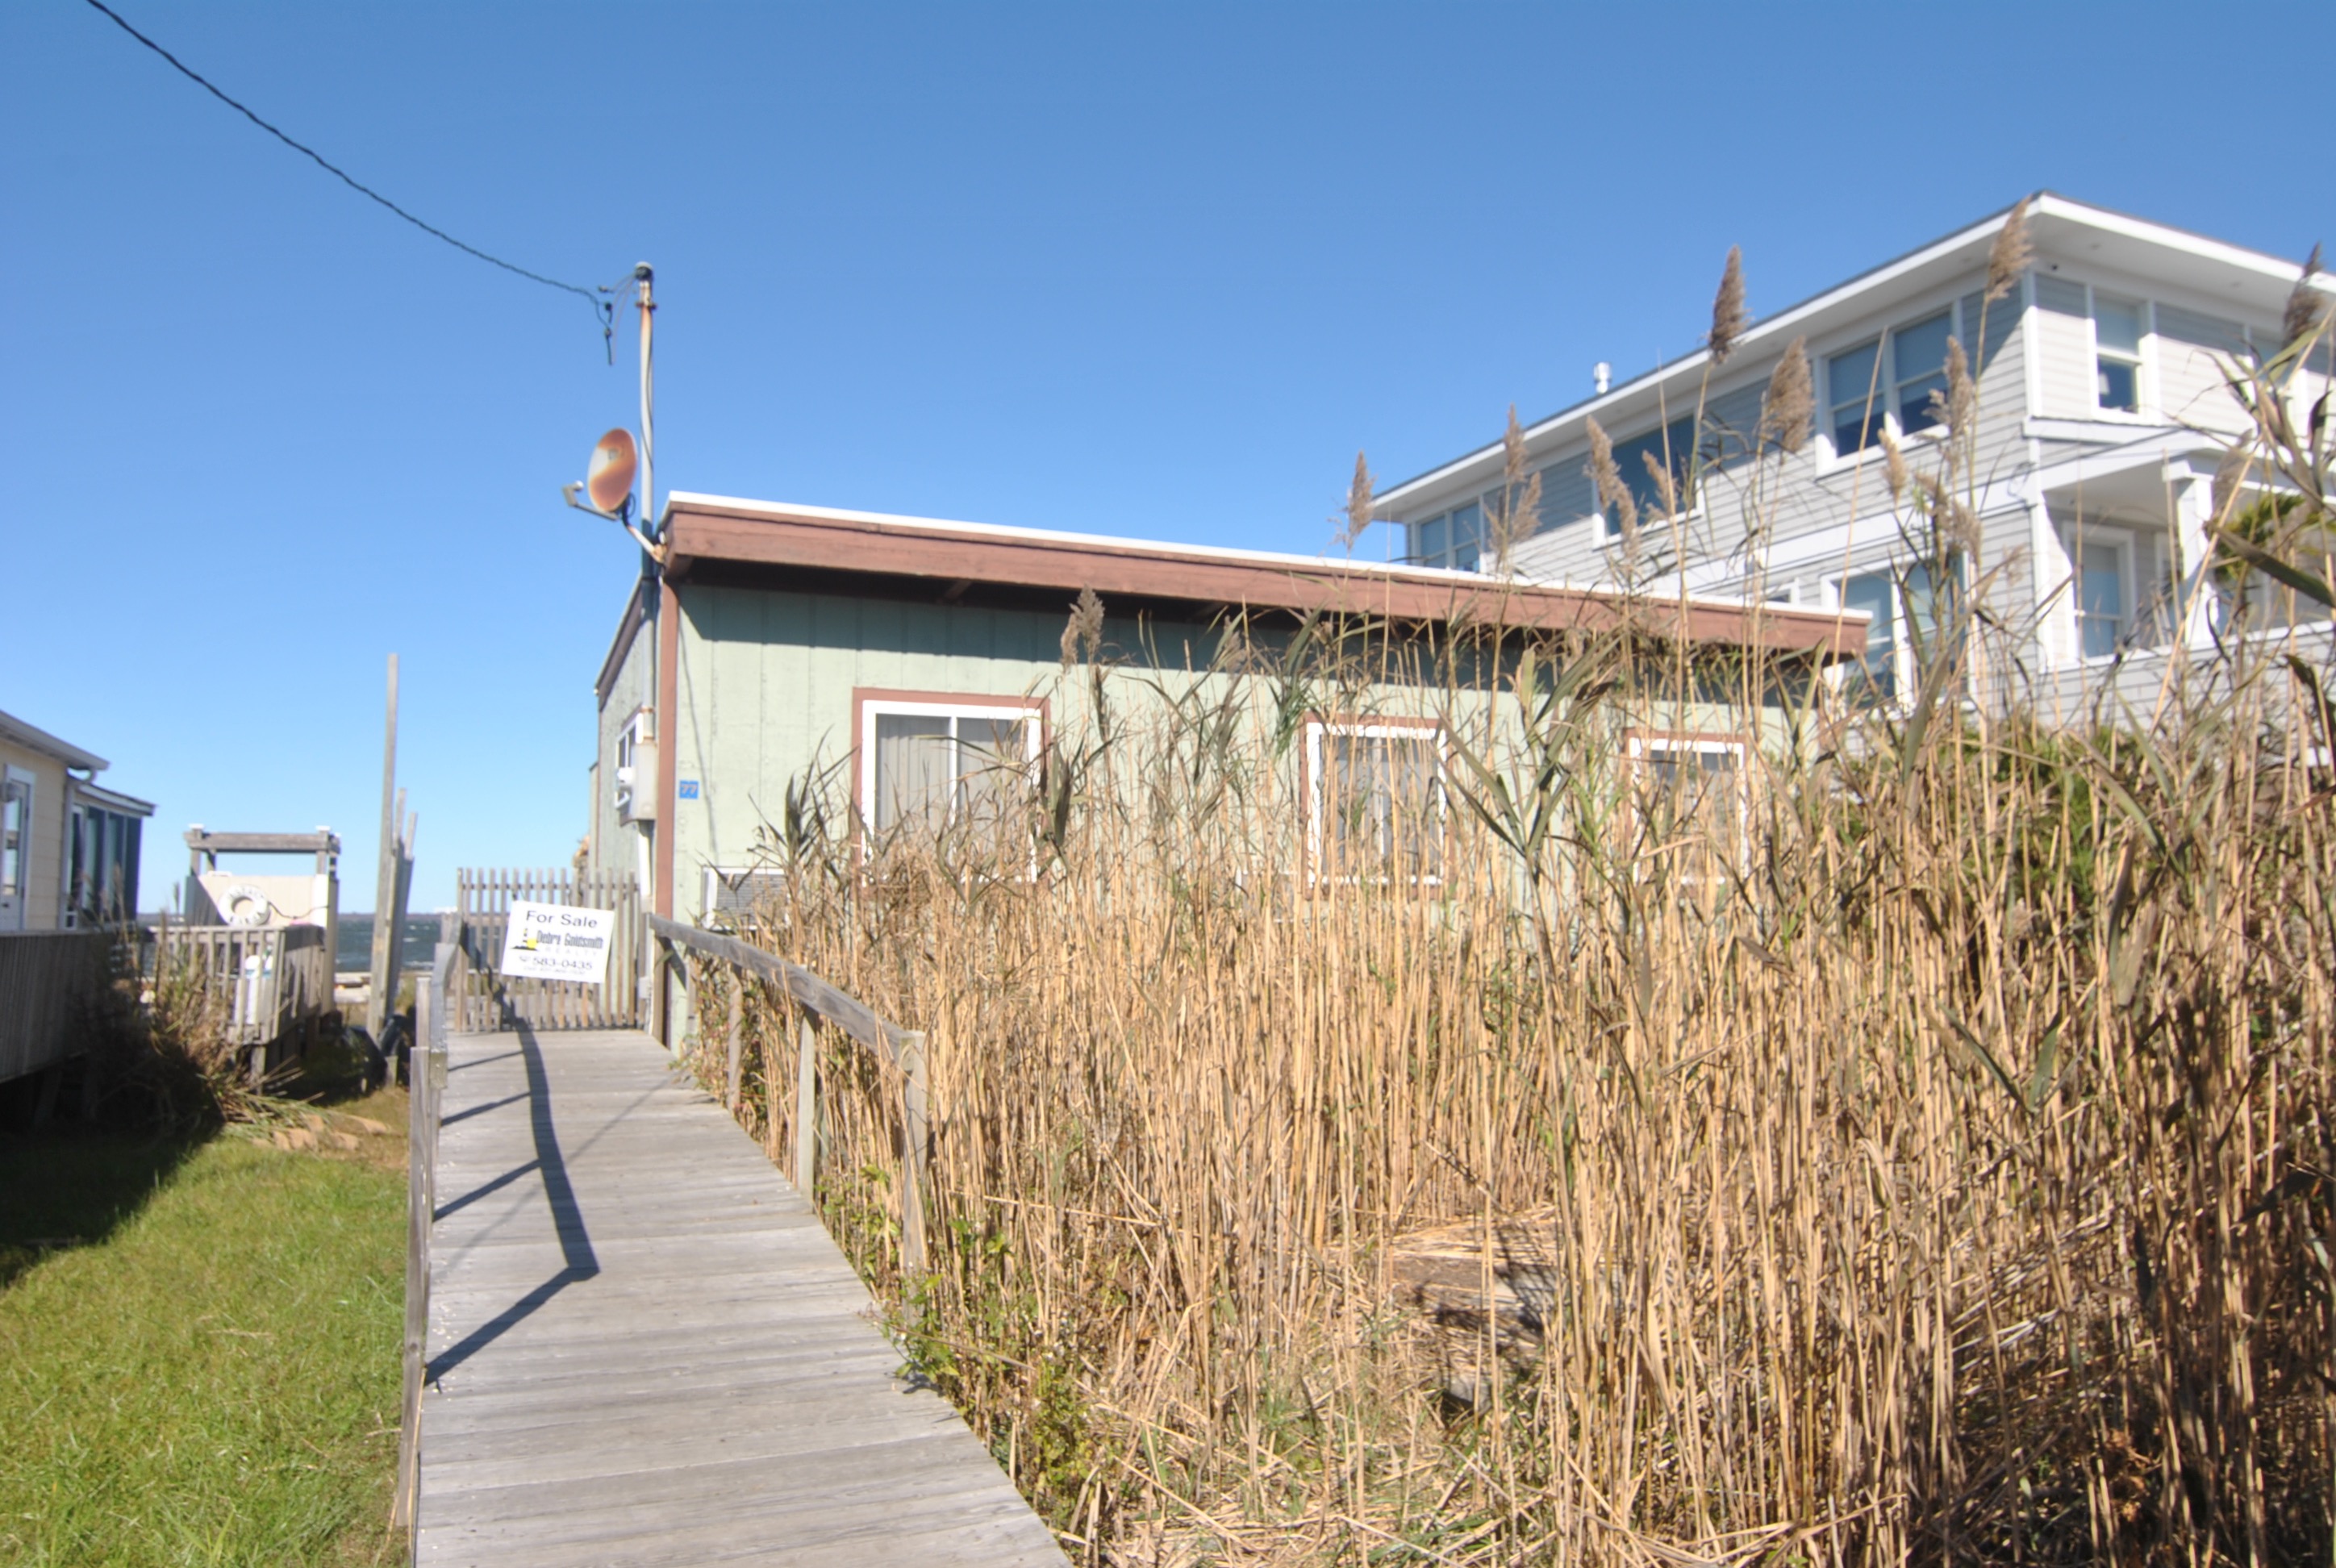 Renovated bay front home. No water damage from Sandy. Great deck overlooking the bay.